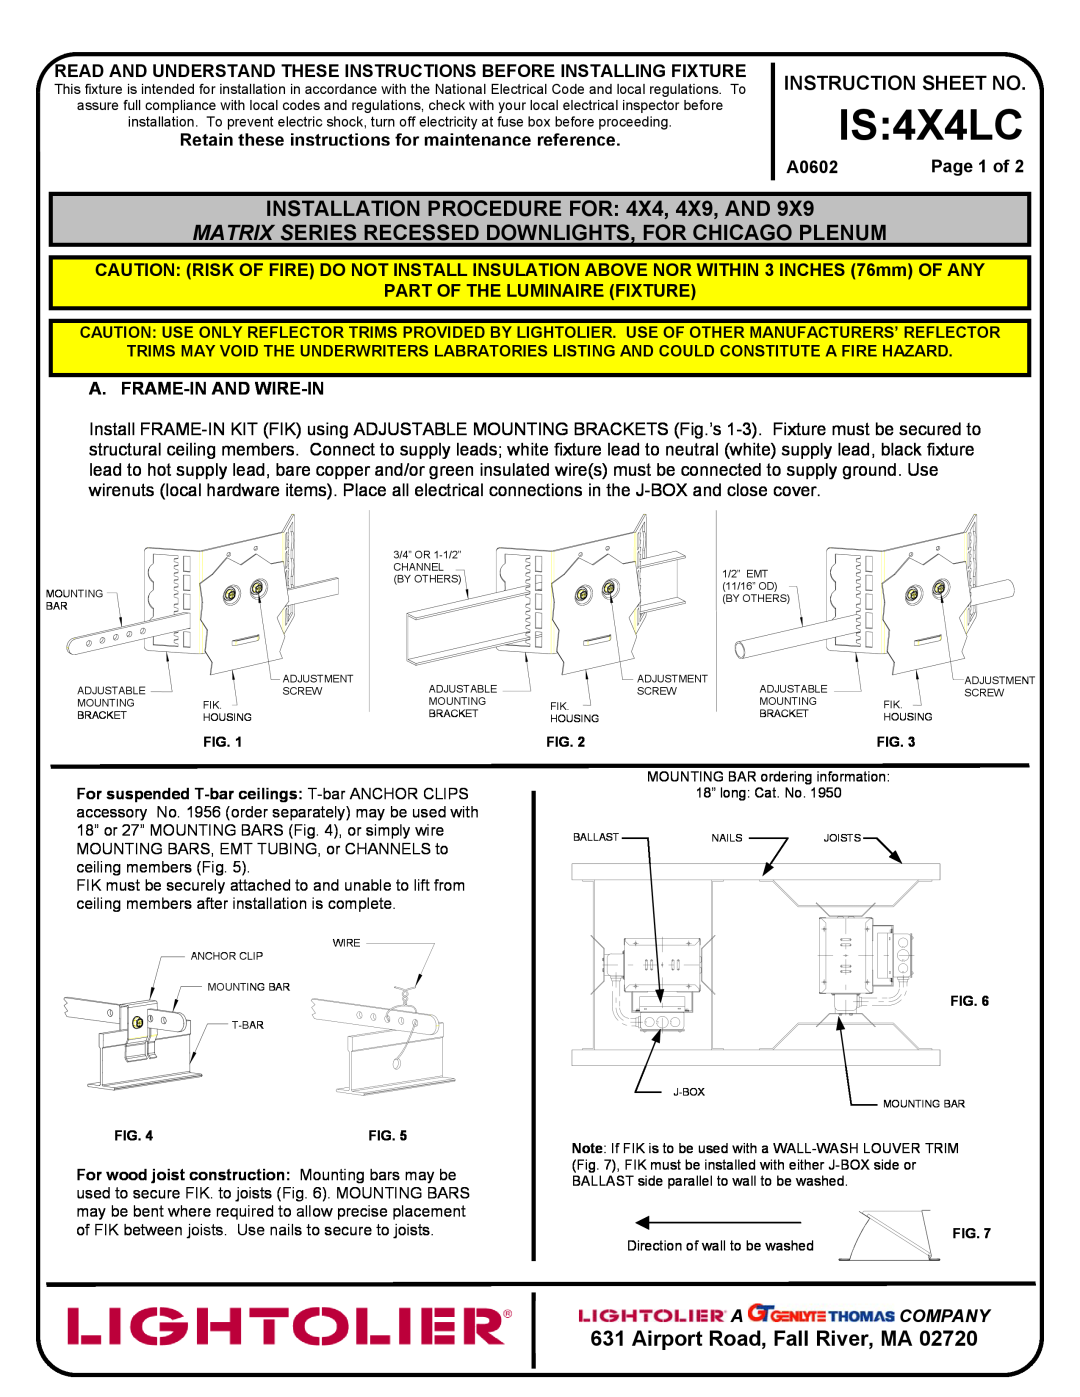 Lightolier IS:4X4LC instruction sheet INSTALLATION PROCEDURE FOR 4X4, 4X9, AND, Airport Road, Fall River, MA, A0602 